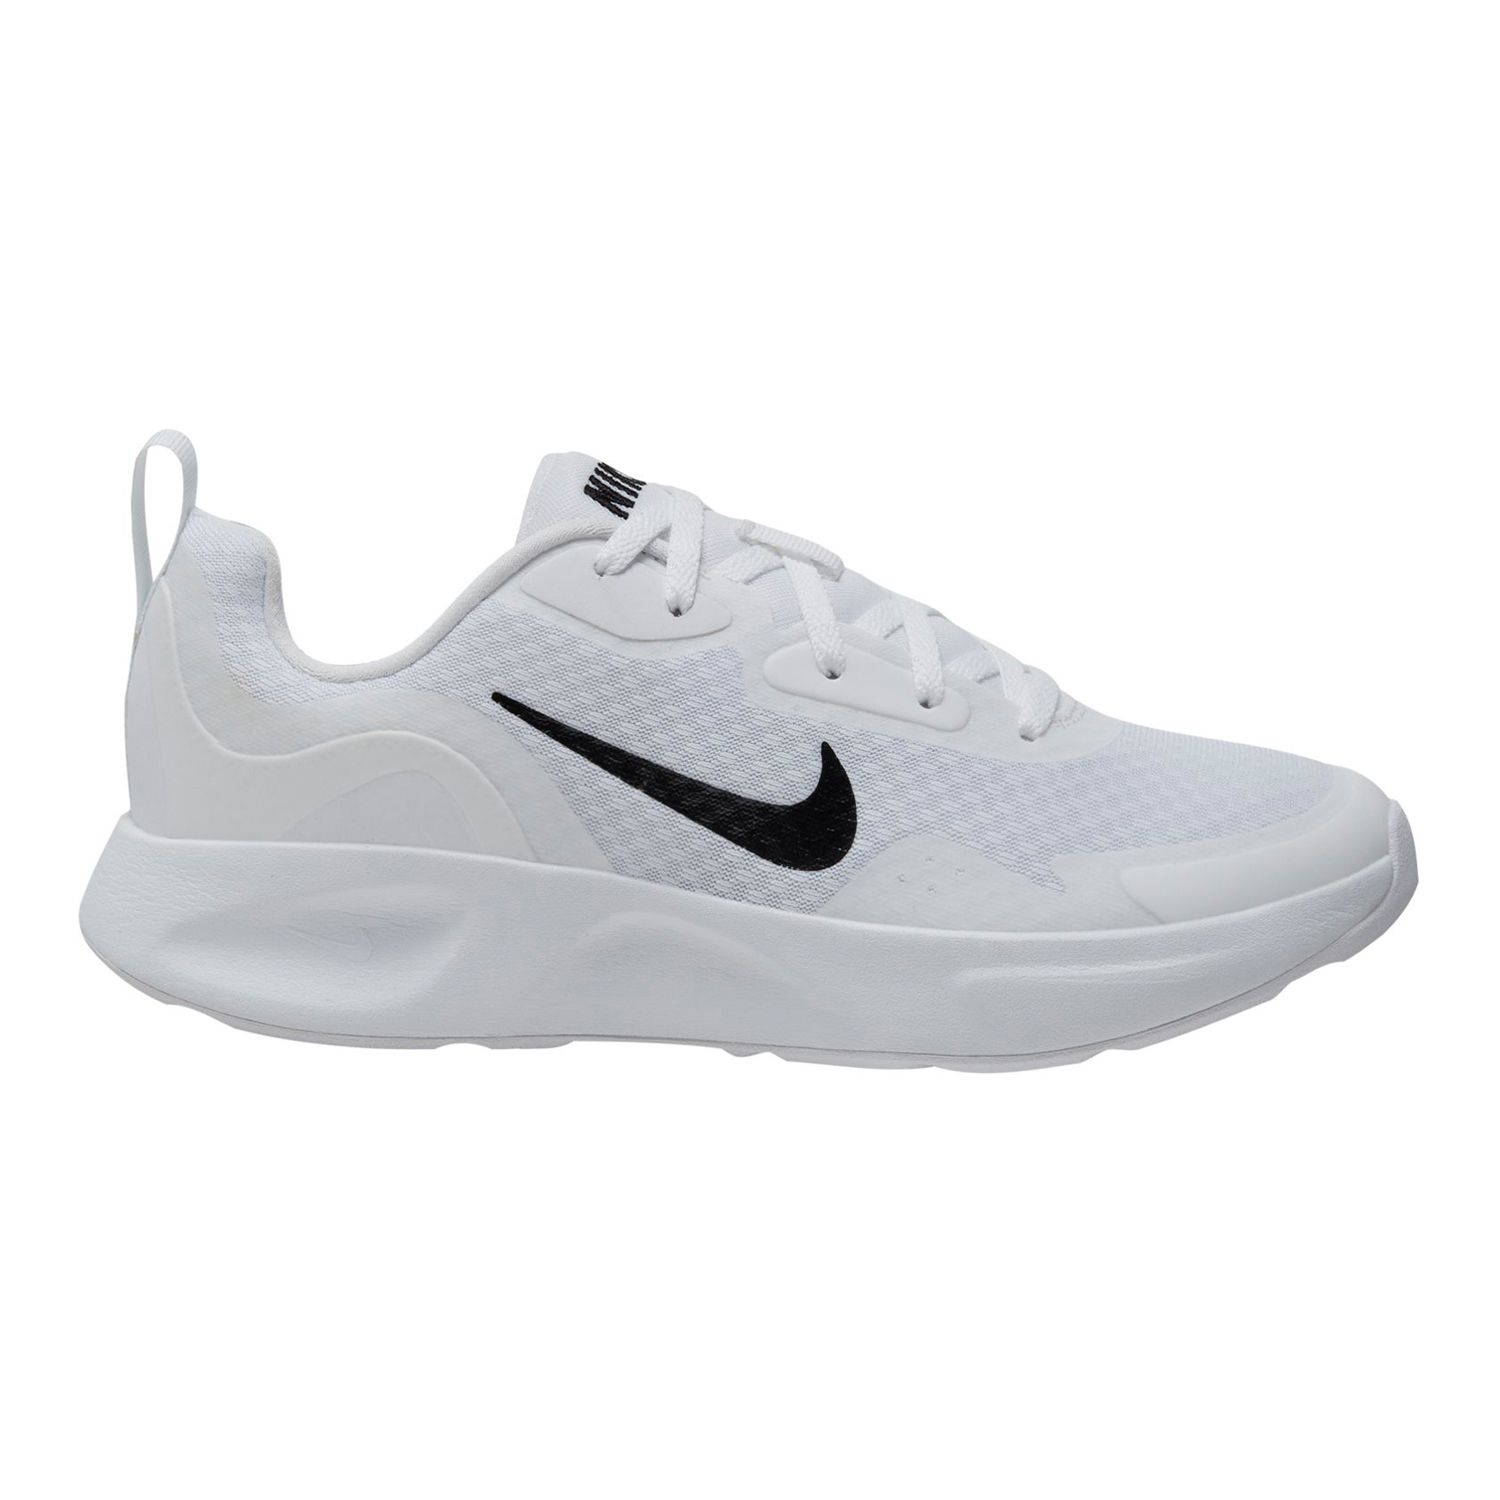 white nike shoes with black swoosh